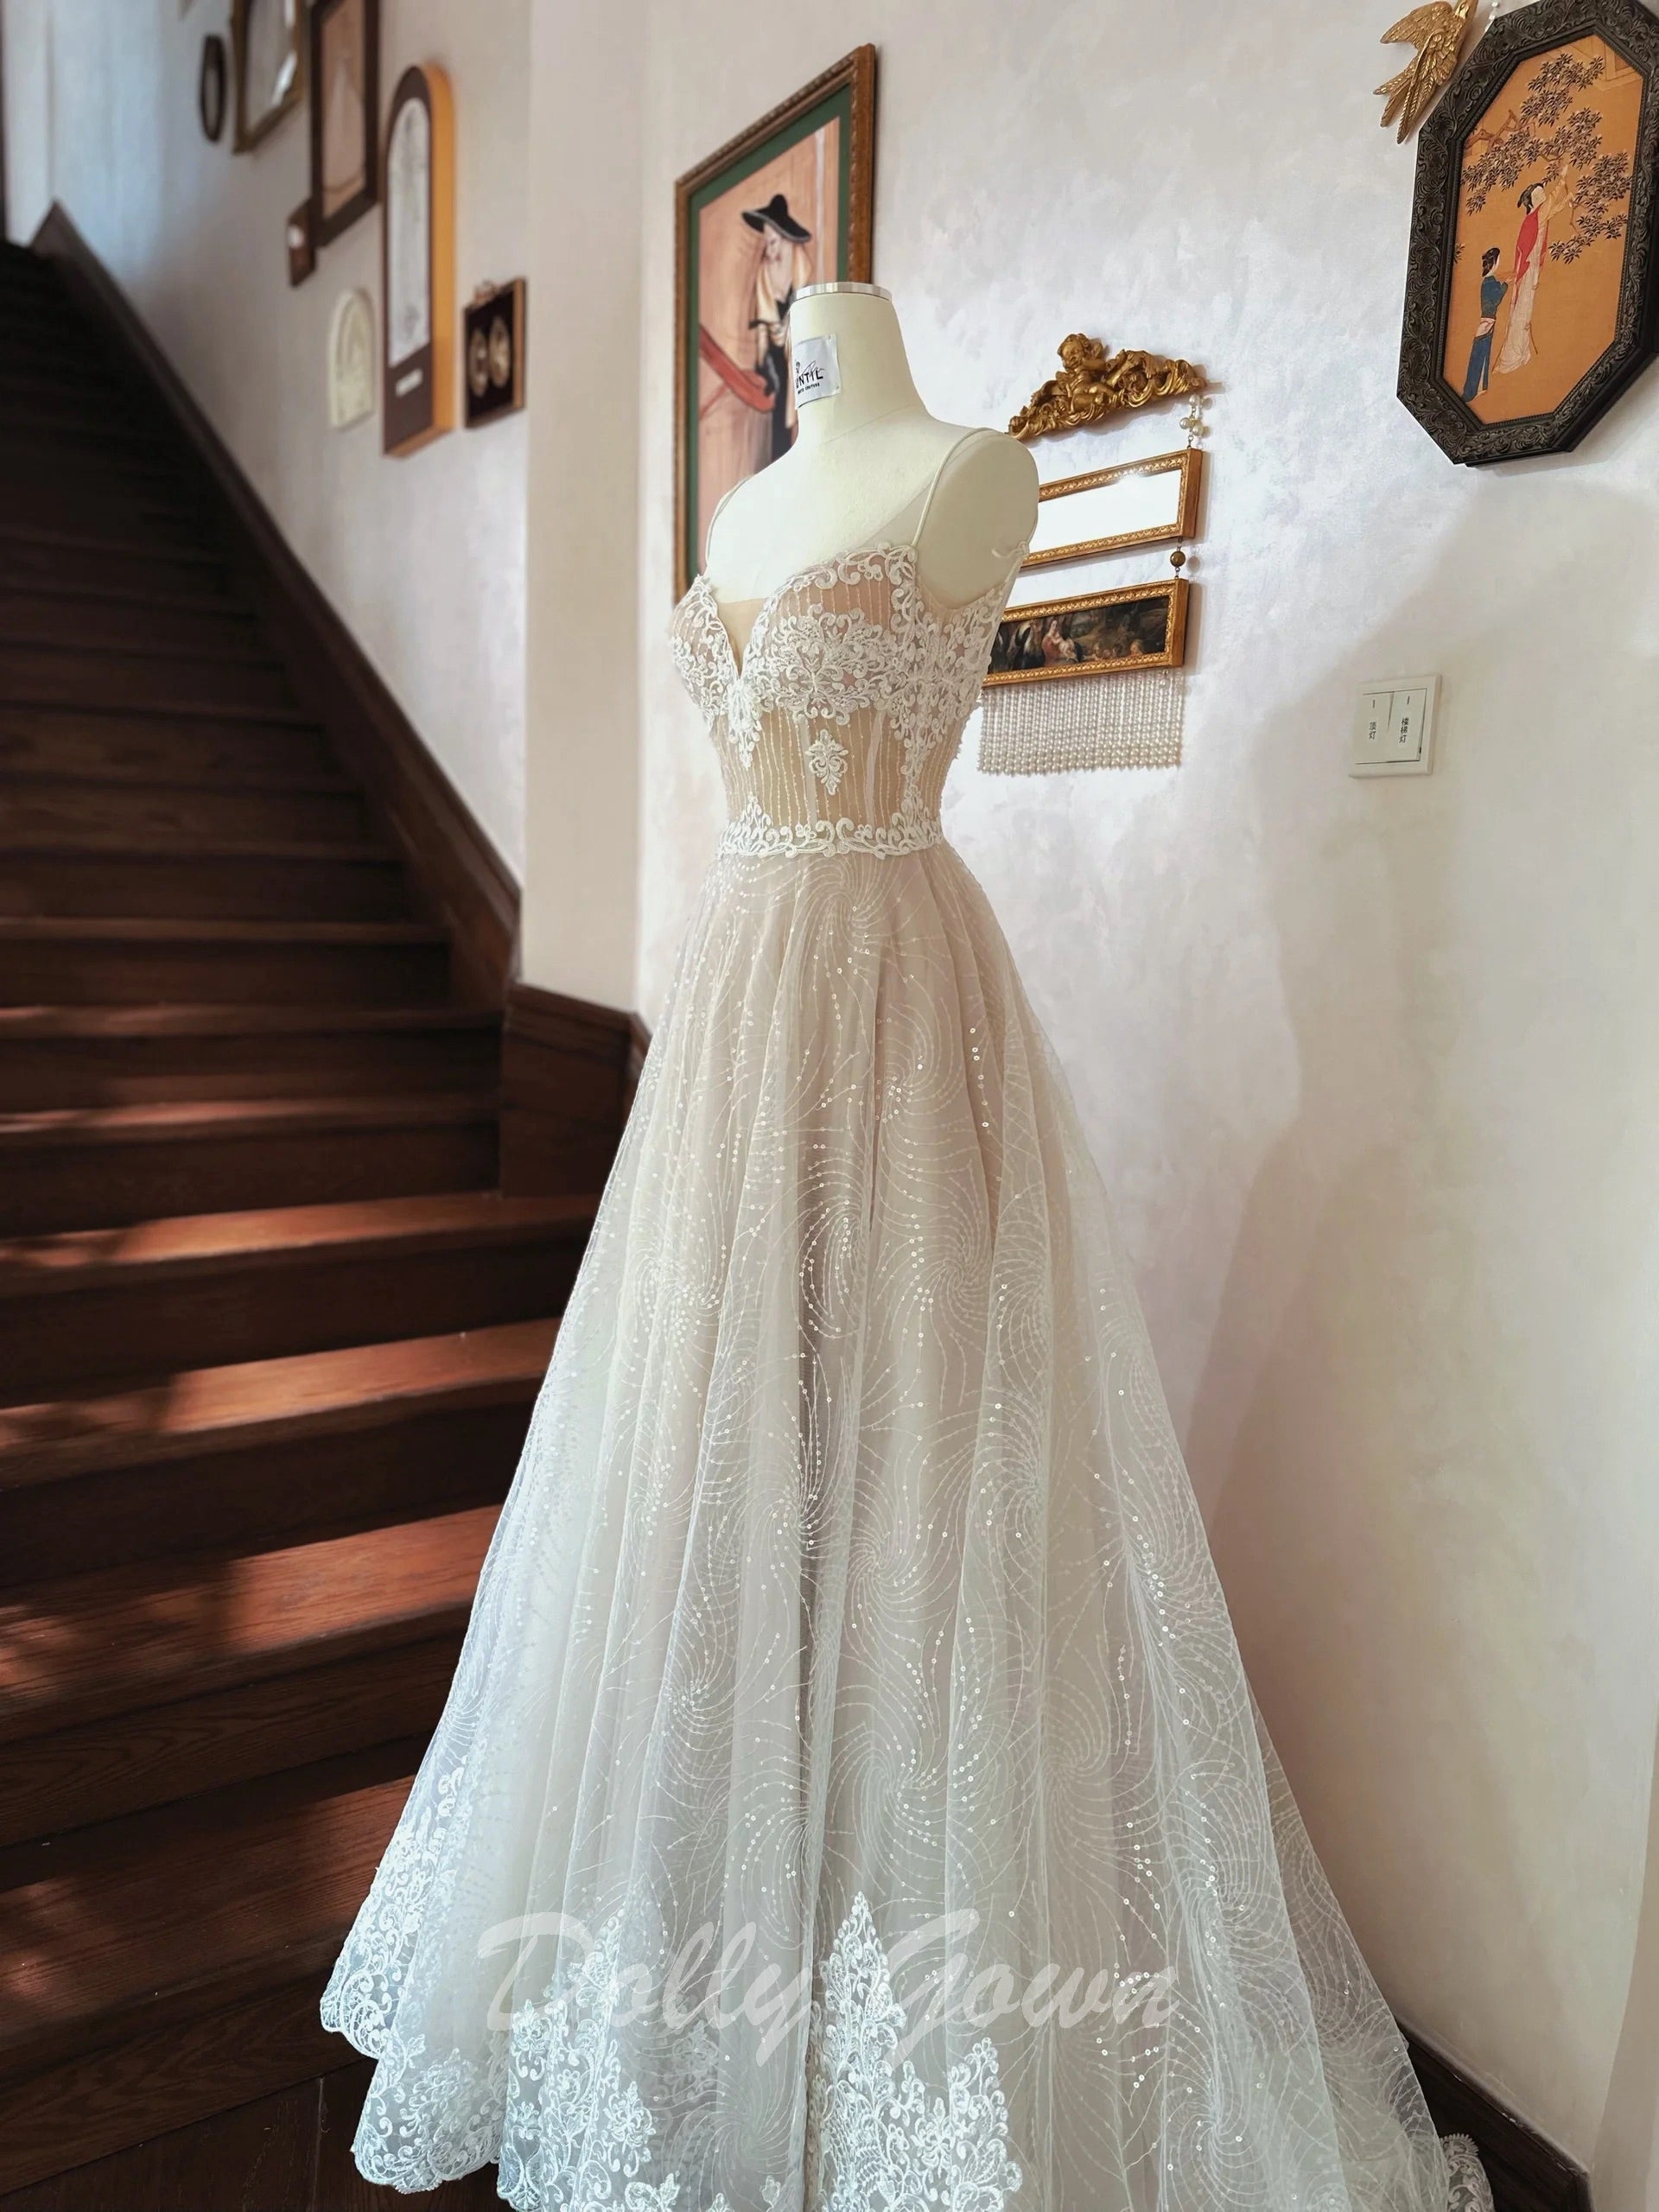 Light Champagne See Through Lace Spaghetti Strap Wedding Dress - DollyGown